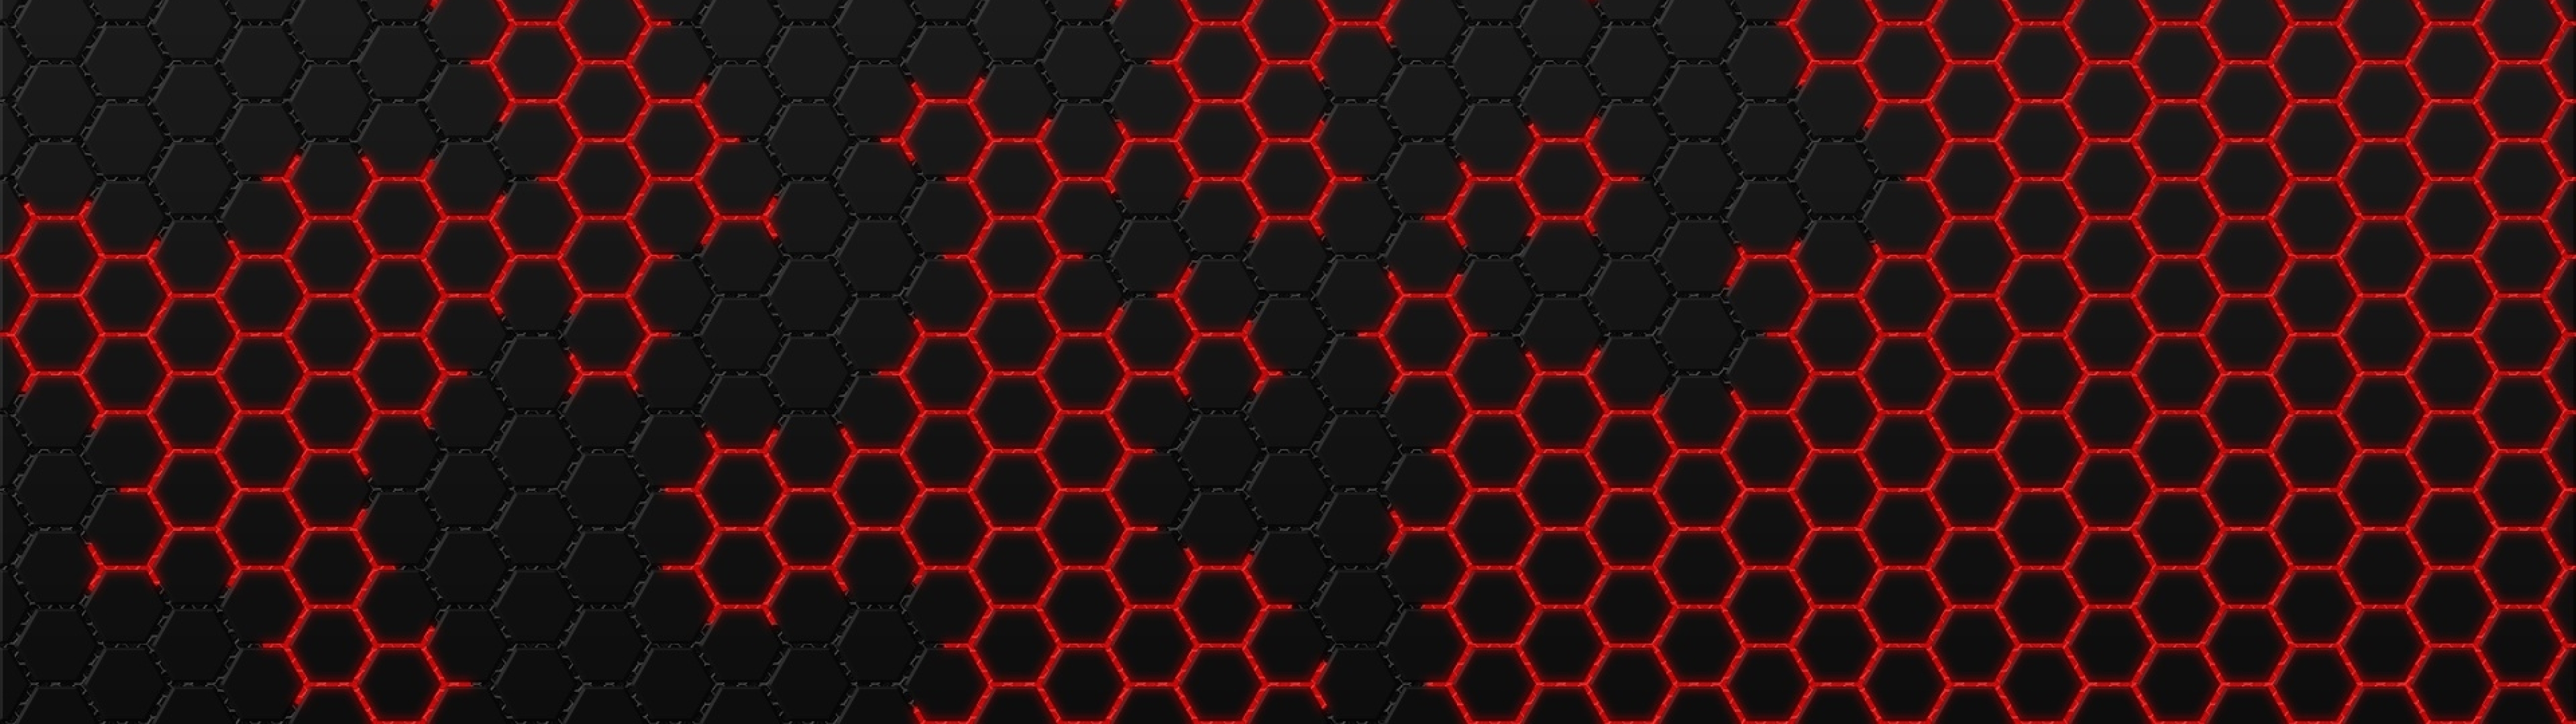 5120x1440 Black and Red Hexagon 5120x1440 Resolution Wallpaper, HD Artist  4K Wallpapers, Images, Photos and Background - Wallpapers Den